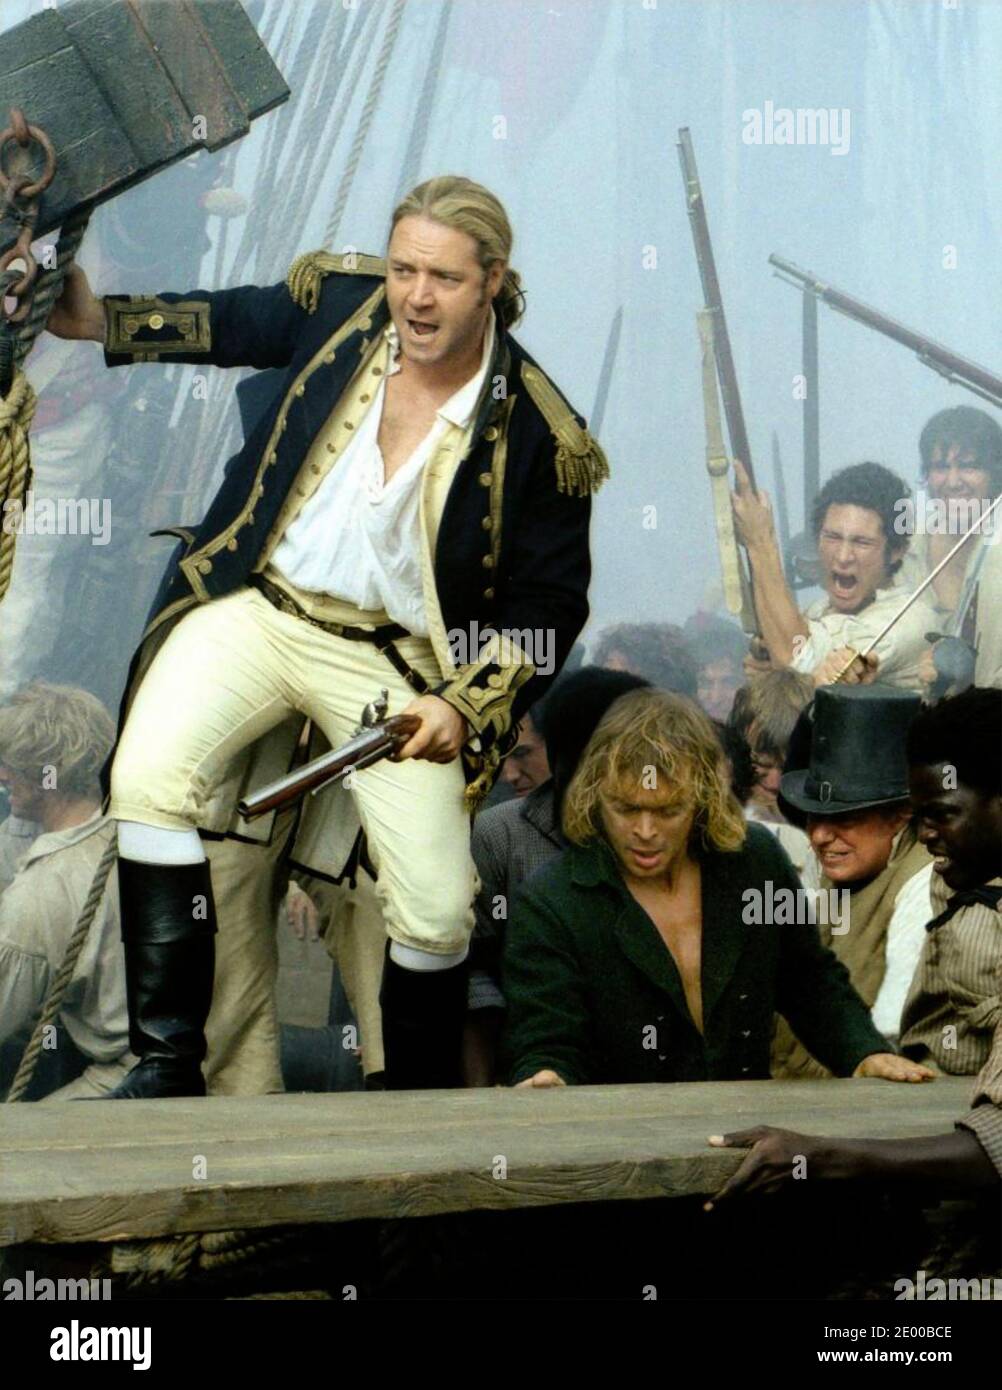 MASTER AND COMMANDER: THE FAR SIDE OF THE WORLD 2003 20th Century Fox Film mit Russell Crowe als Jack Aubrey Stockfoto